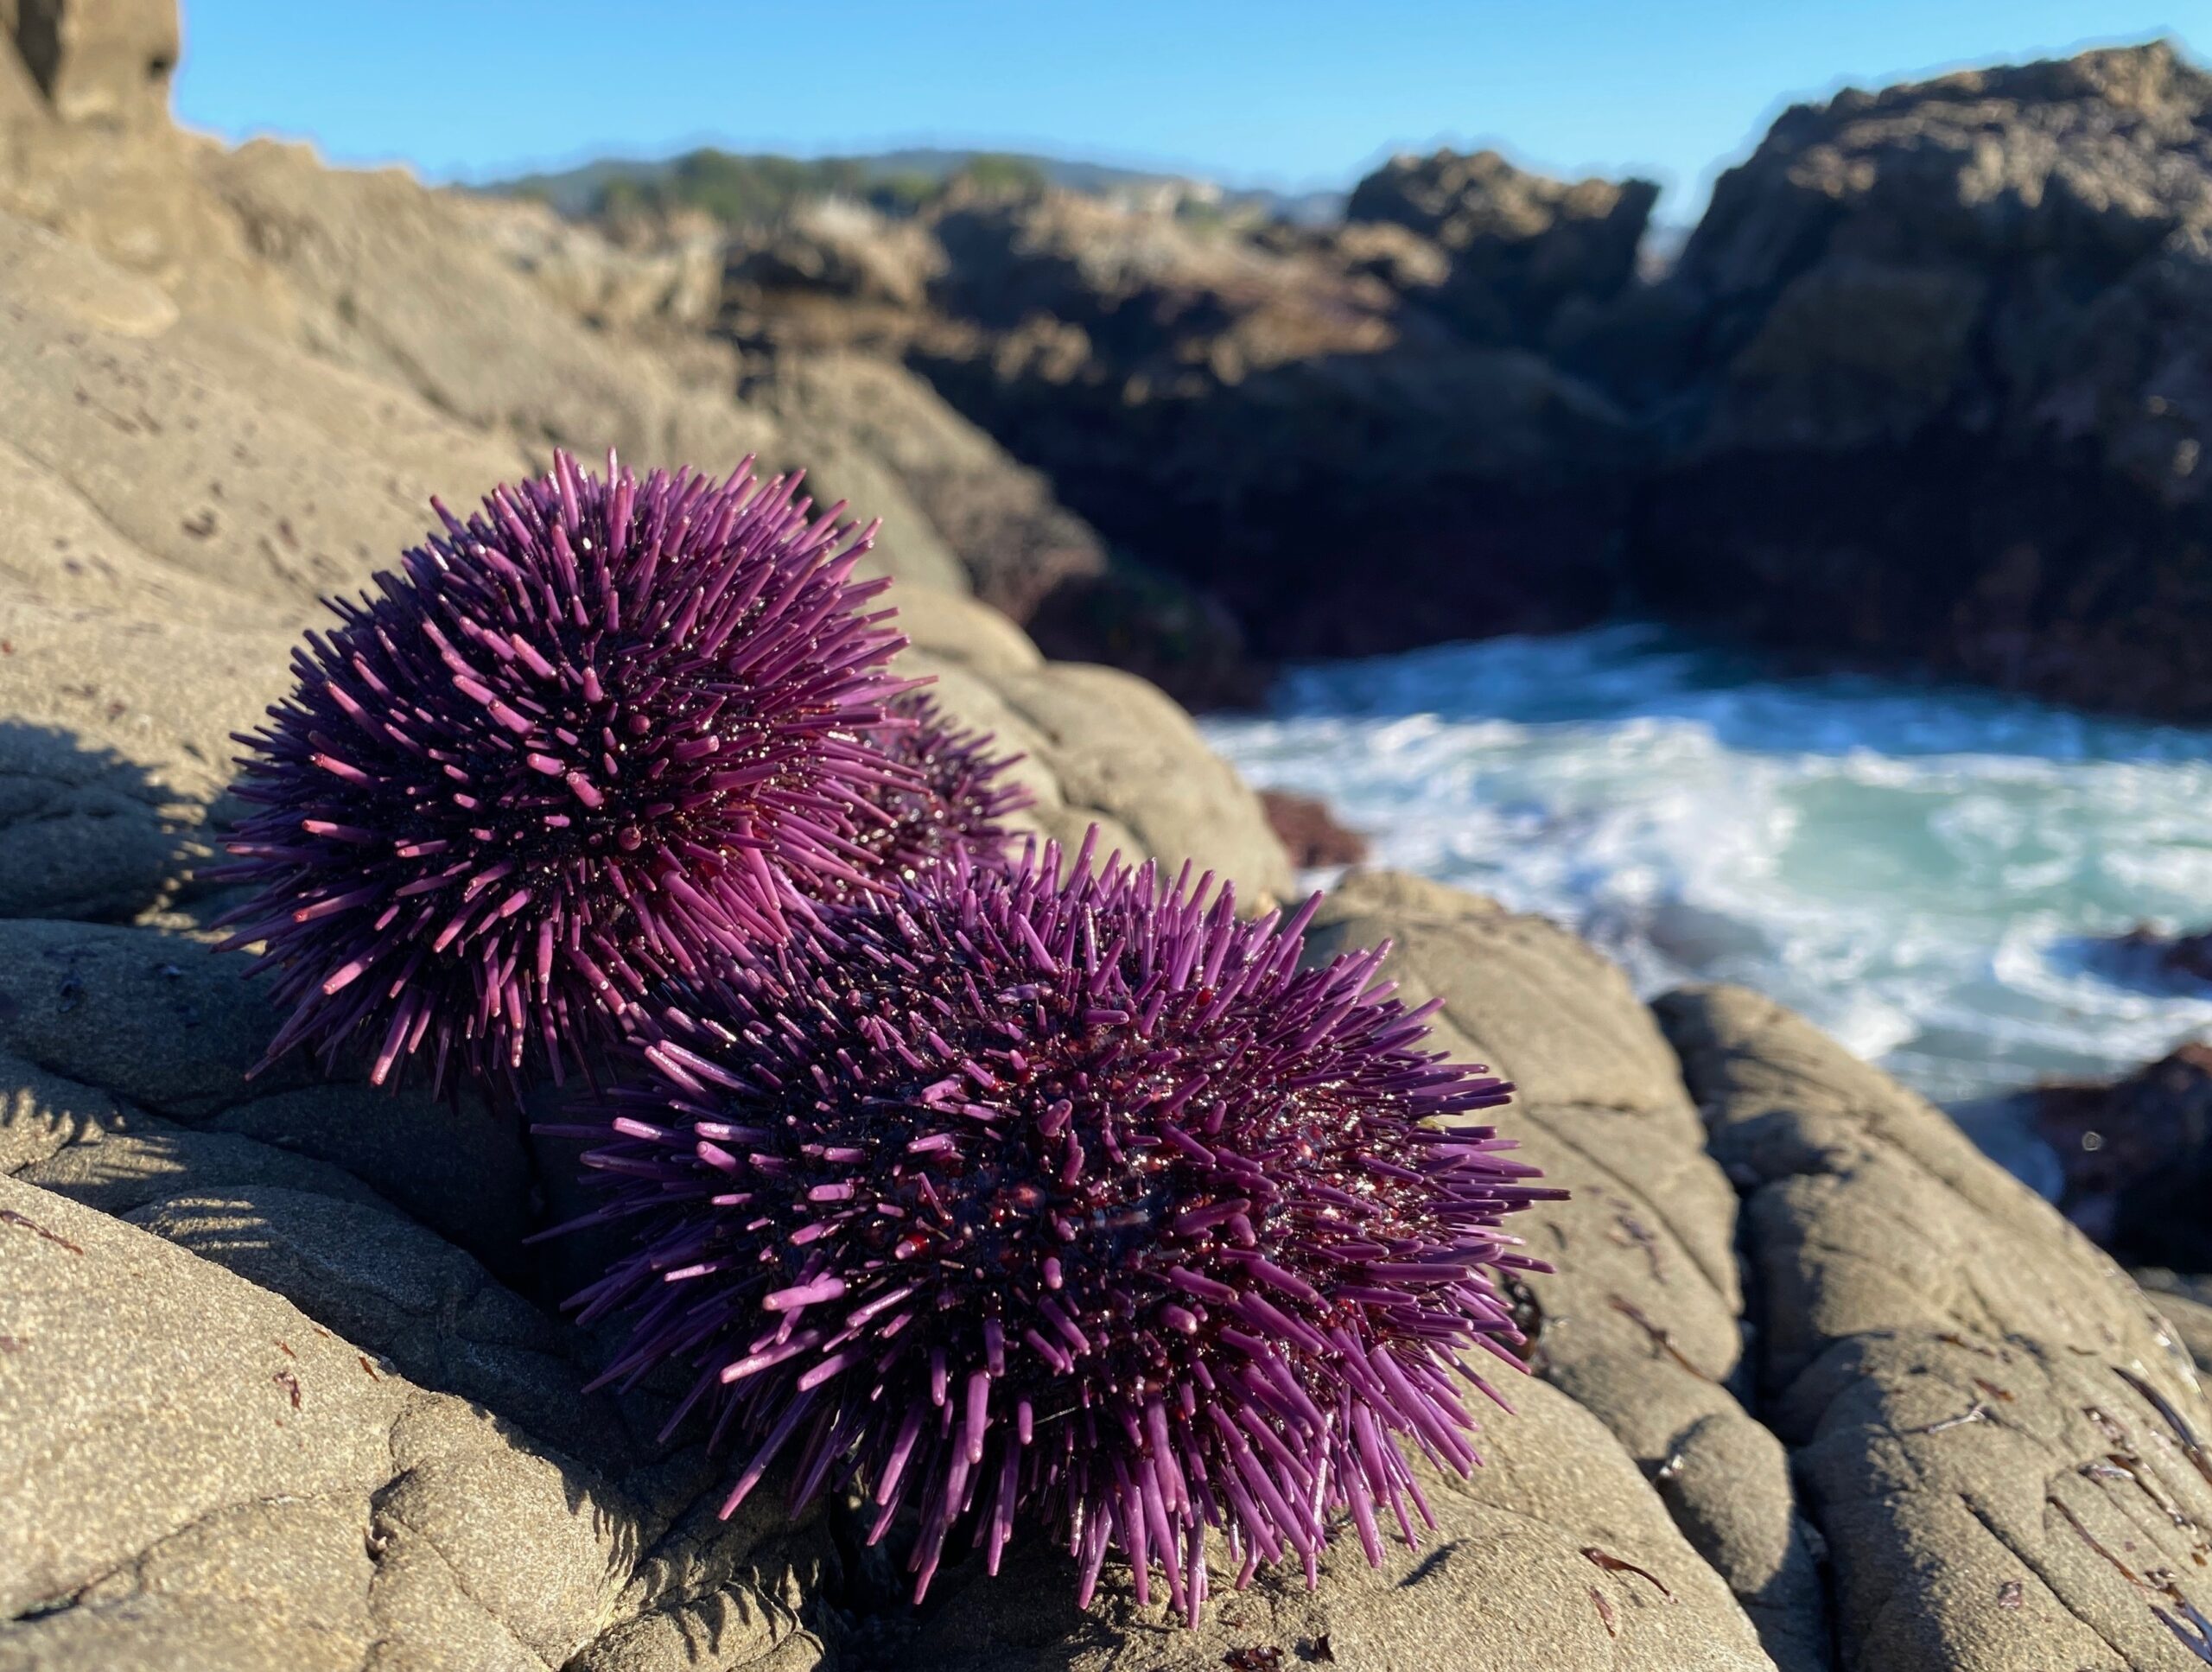 Sorry not sorry—it’s our moral imperative to eat sea urchins